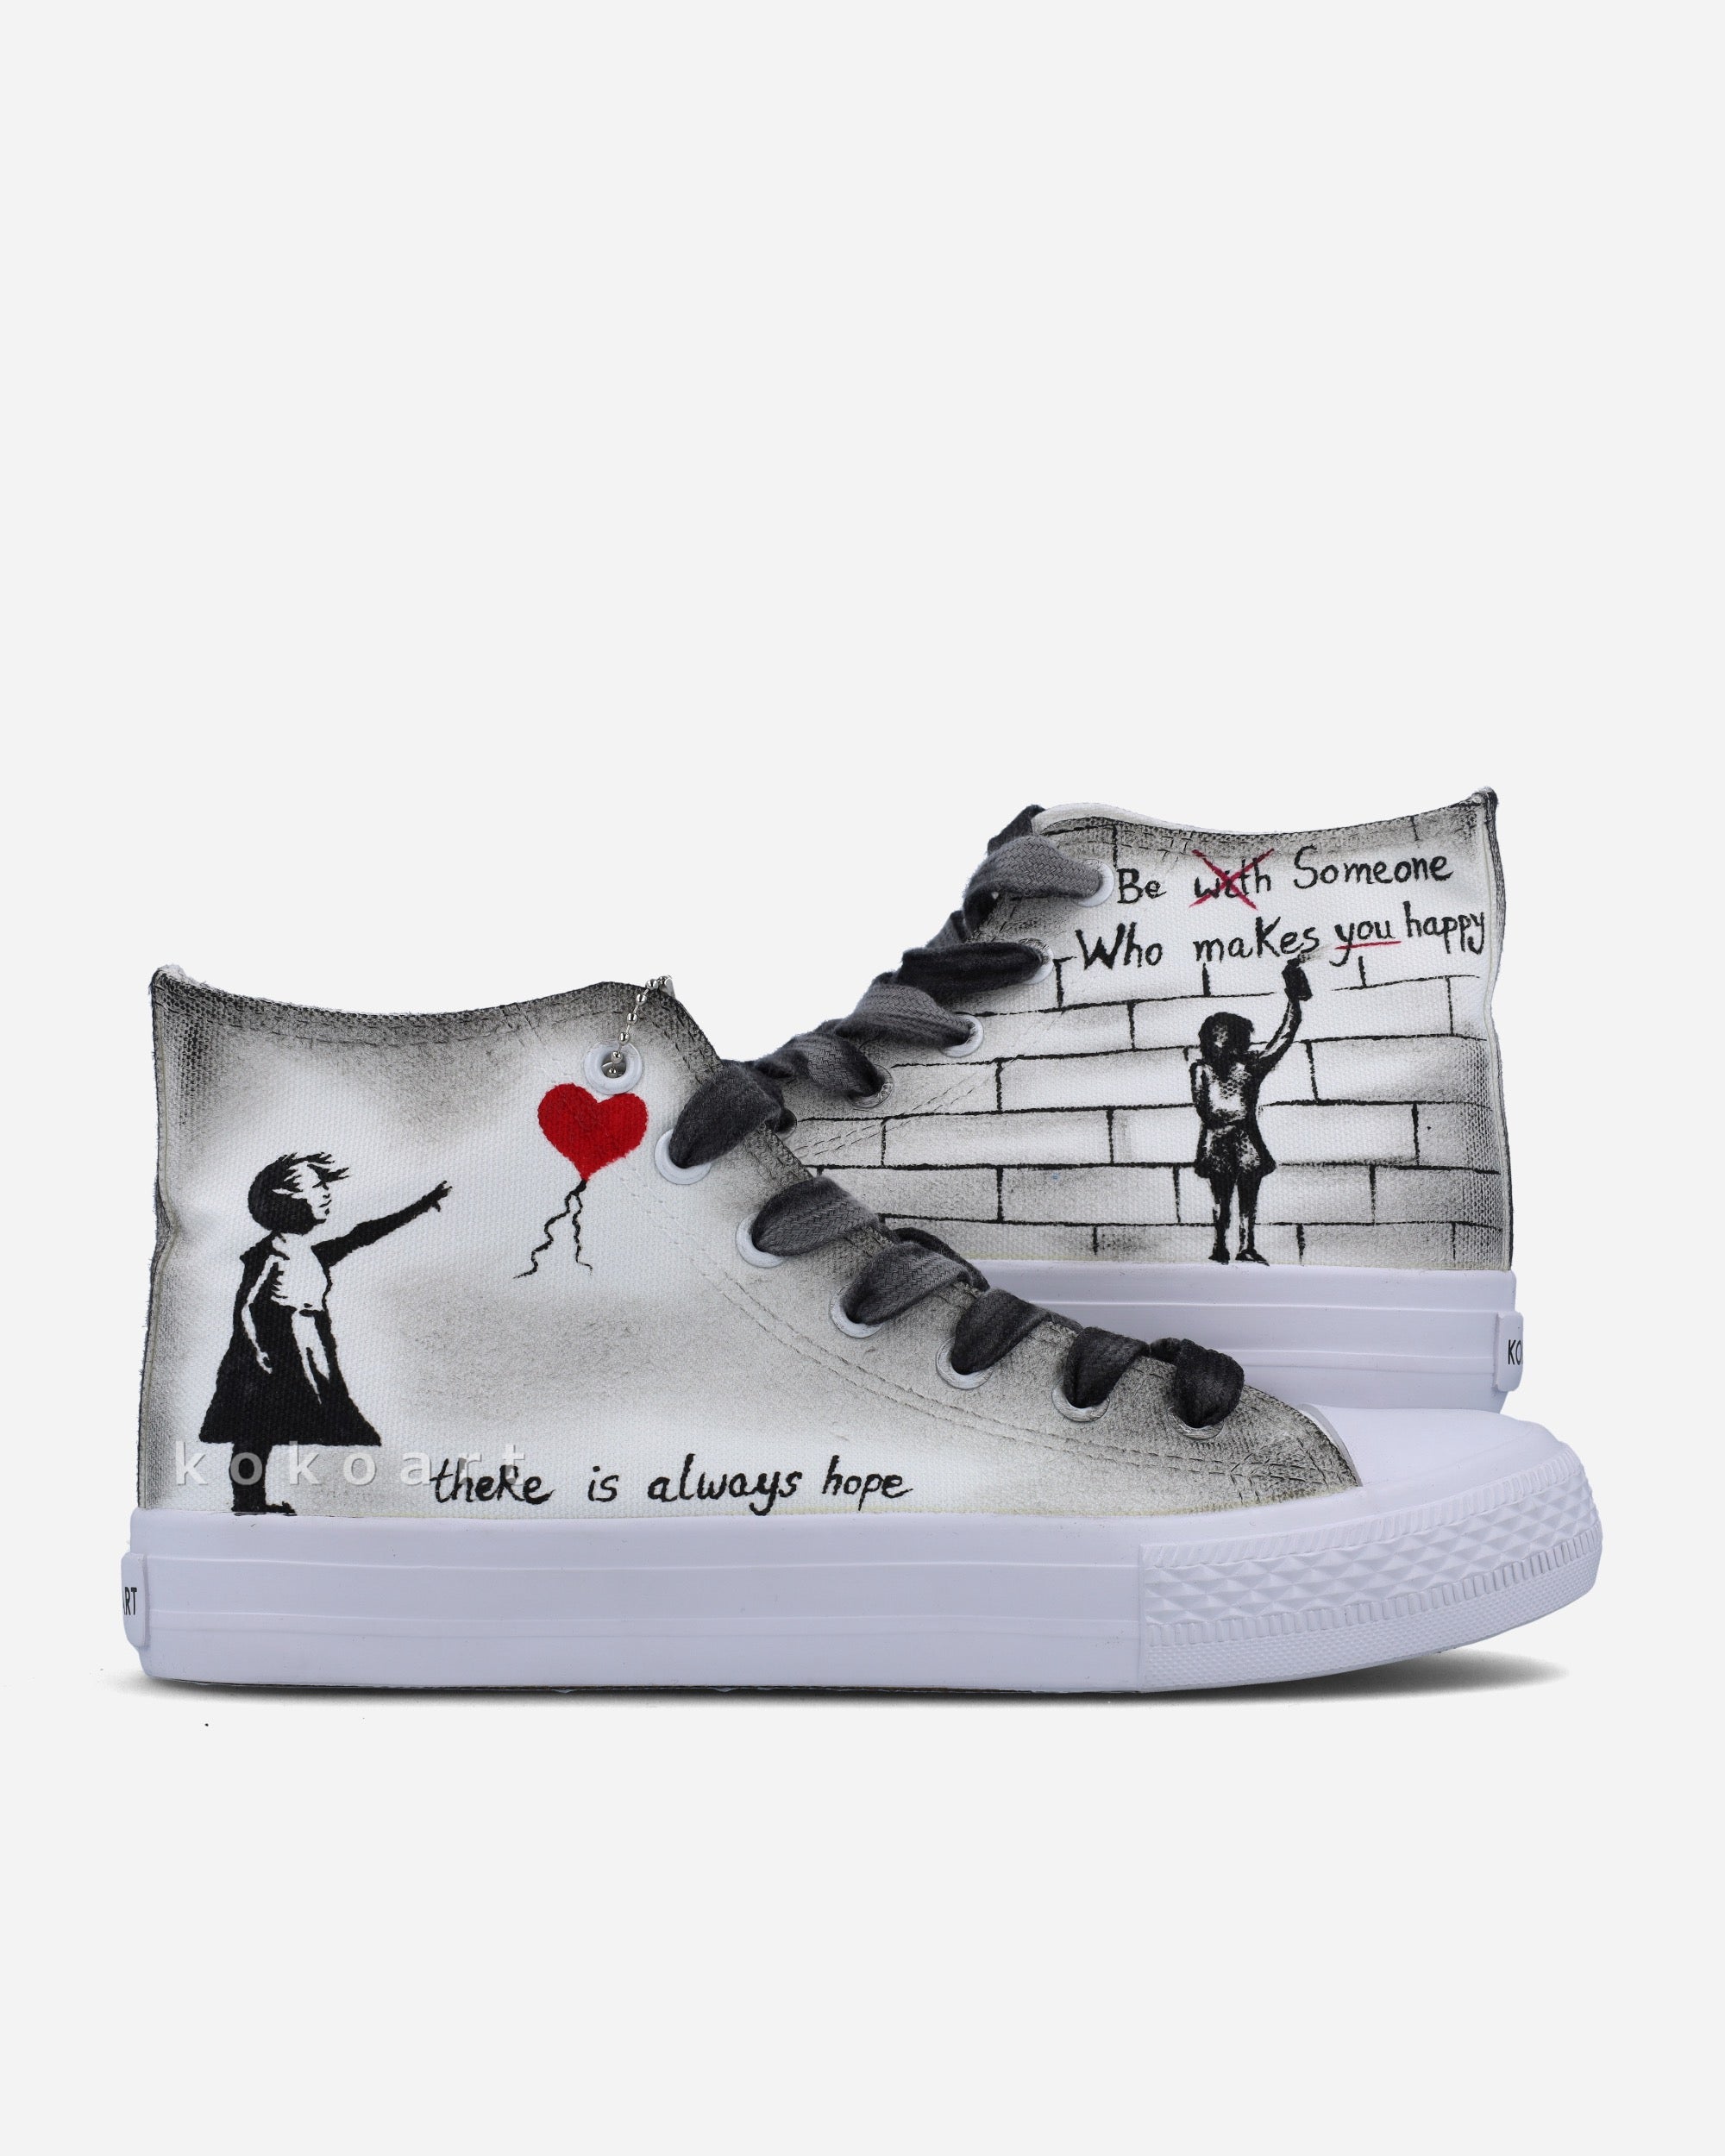 Banksy Hand Painted Shoes